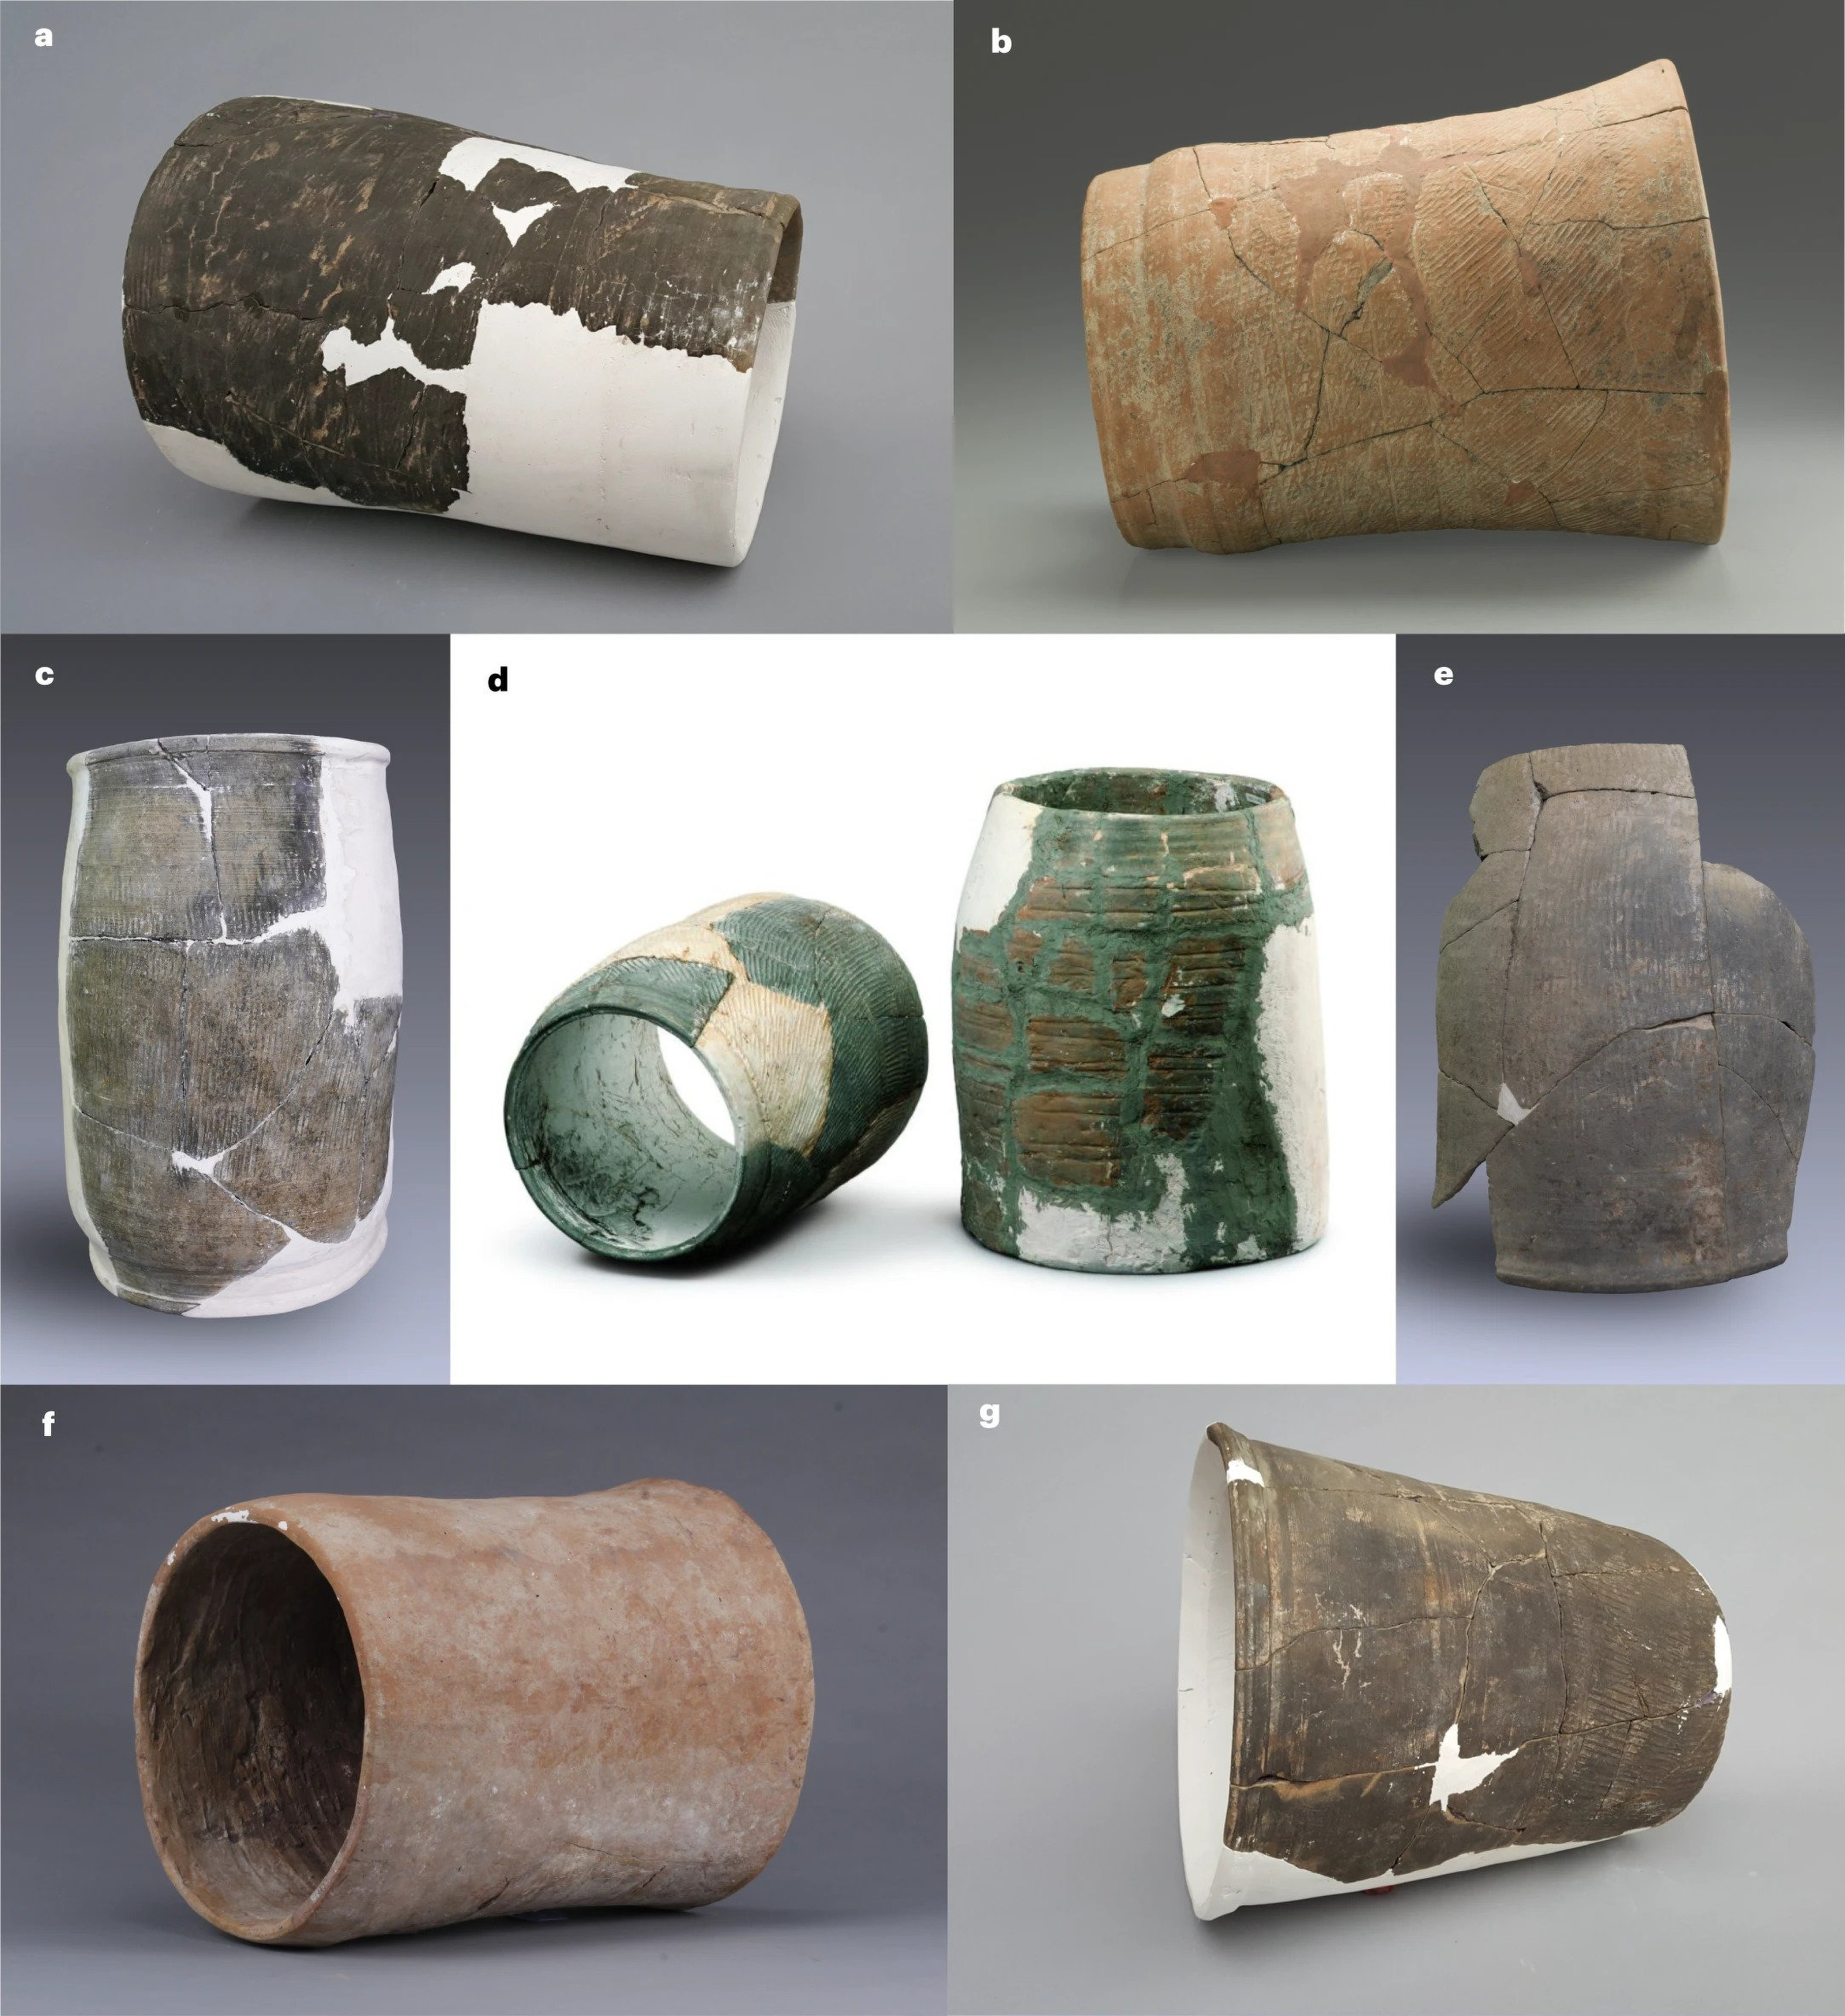 Ceramic drainage pipes excavated from the Pingliangtai site point to the existence of a communal, rather than a centralised, ancient society. Photo: Handout